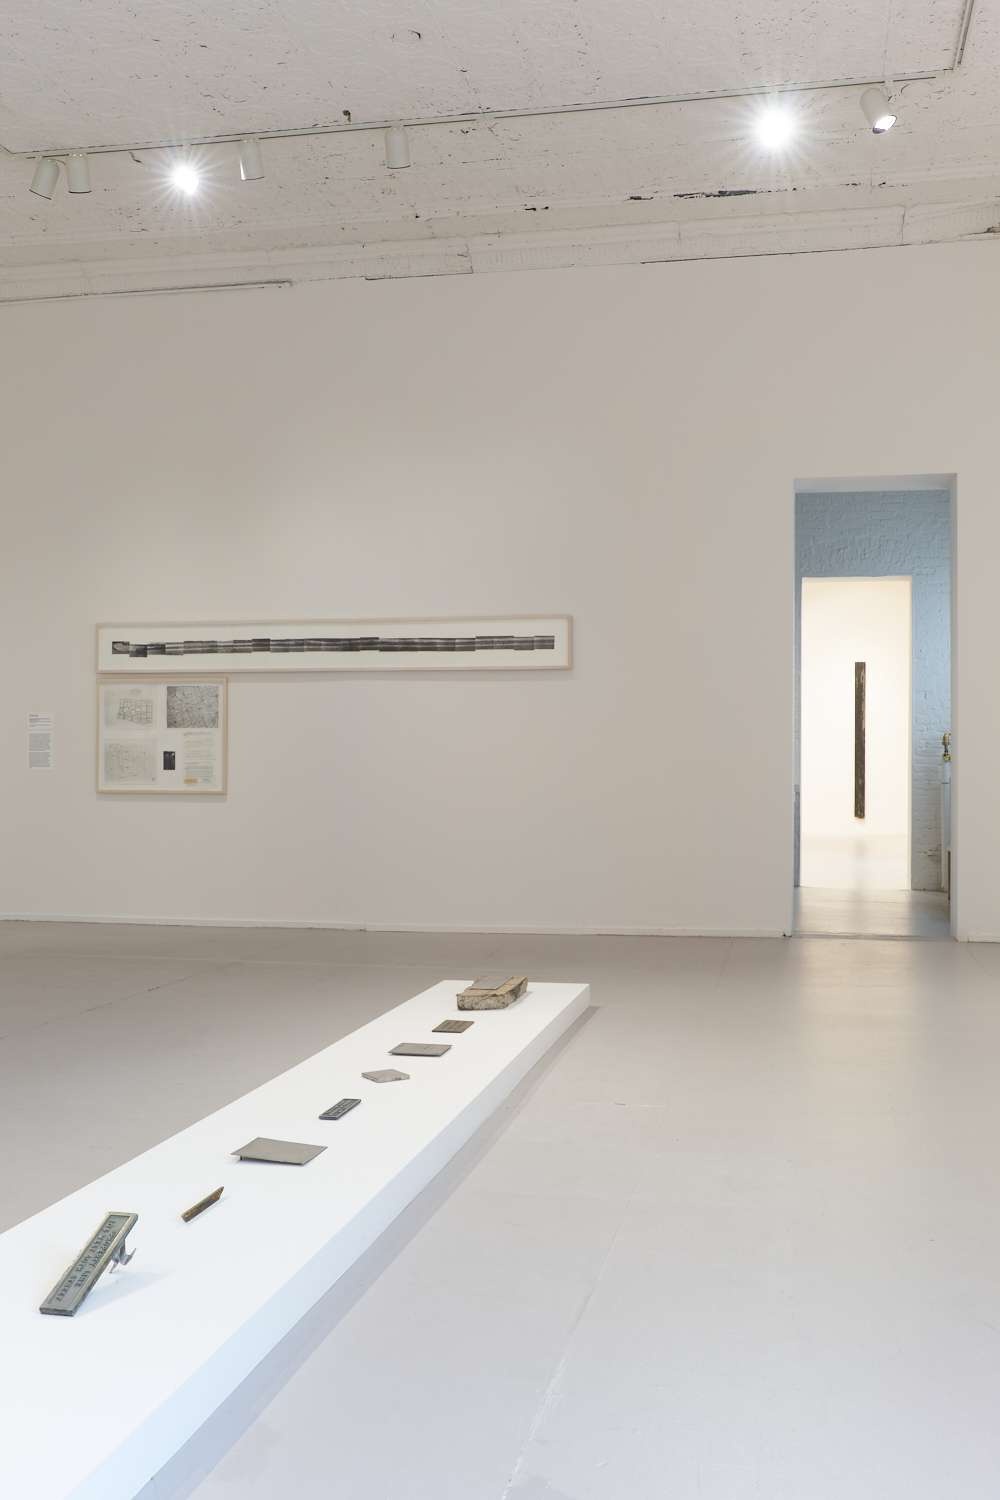 A gallery space with industrial looking objects on top of a long pedestal and long black and white artwork in the background.